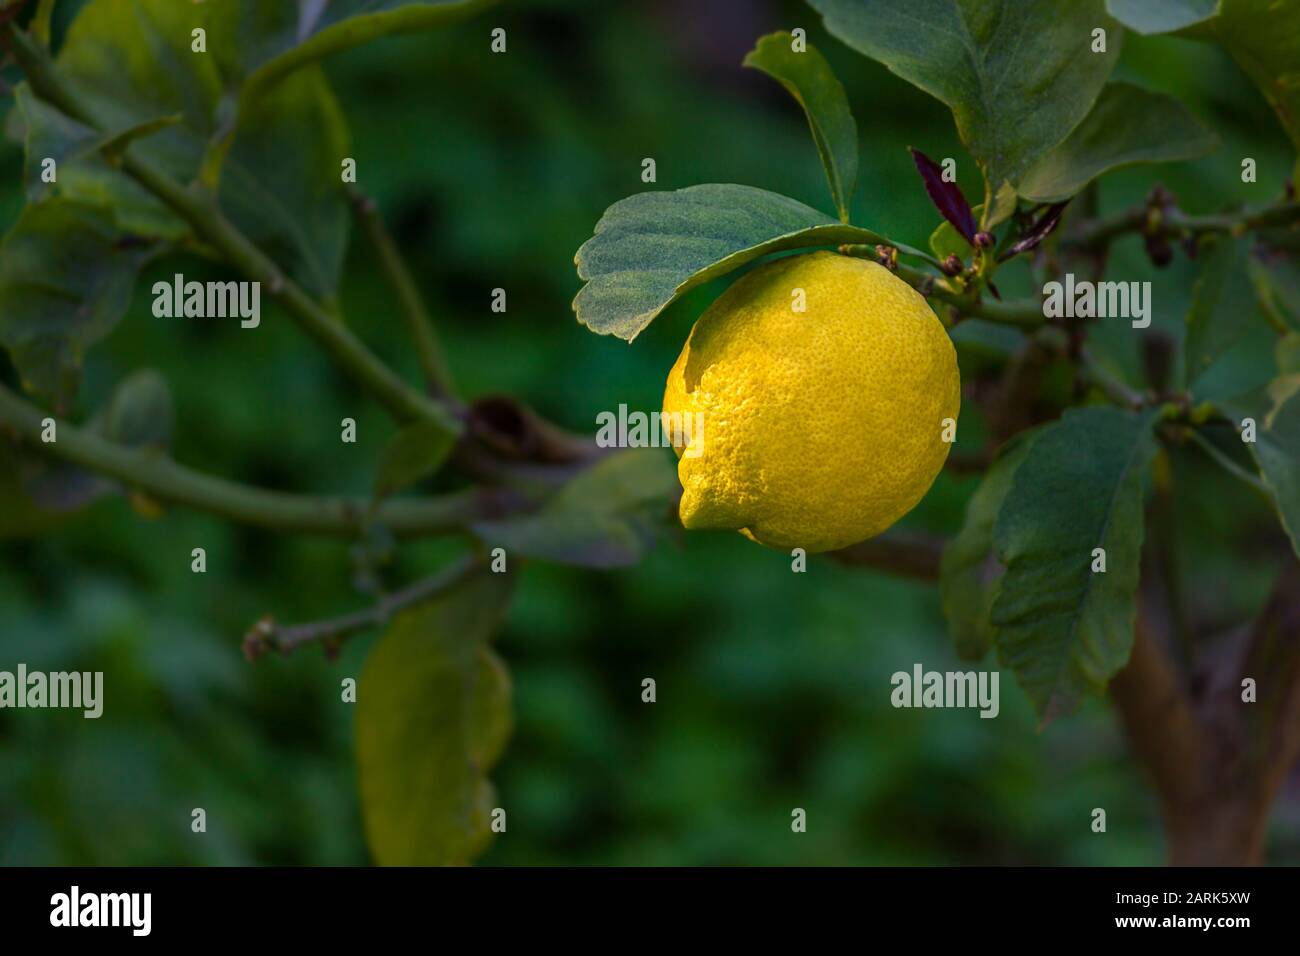 Organic yellow lemon on tree with green leaves as background Stock Photo